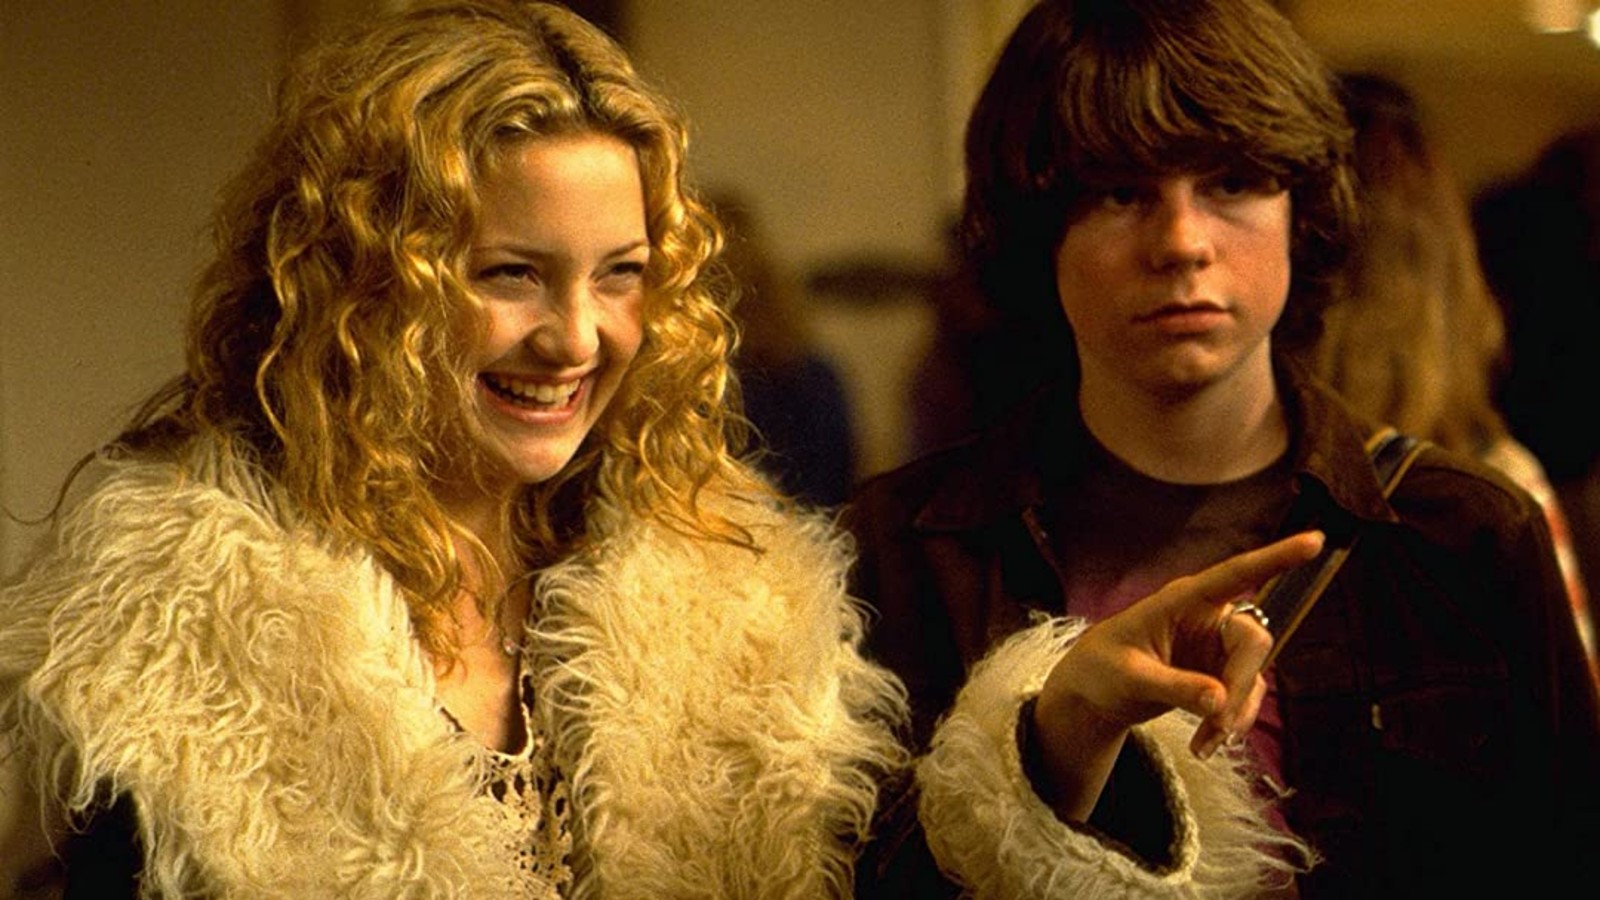 Kate Hudson and Patrick Fugit in Almost Famous (2000)